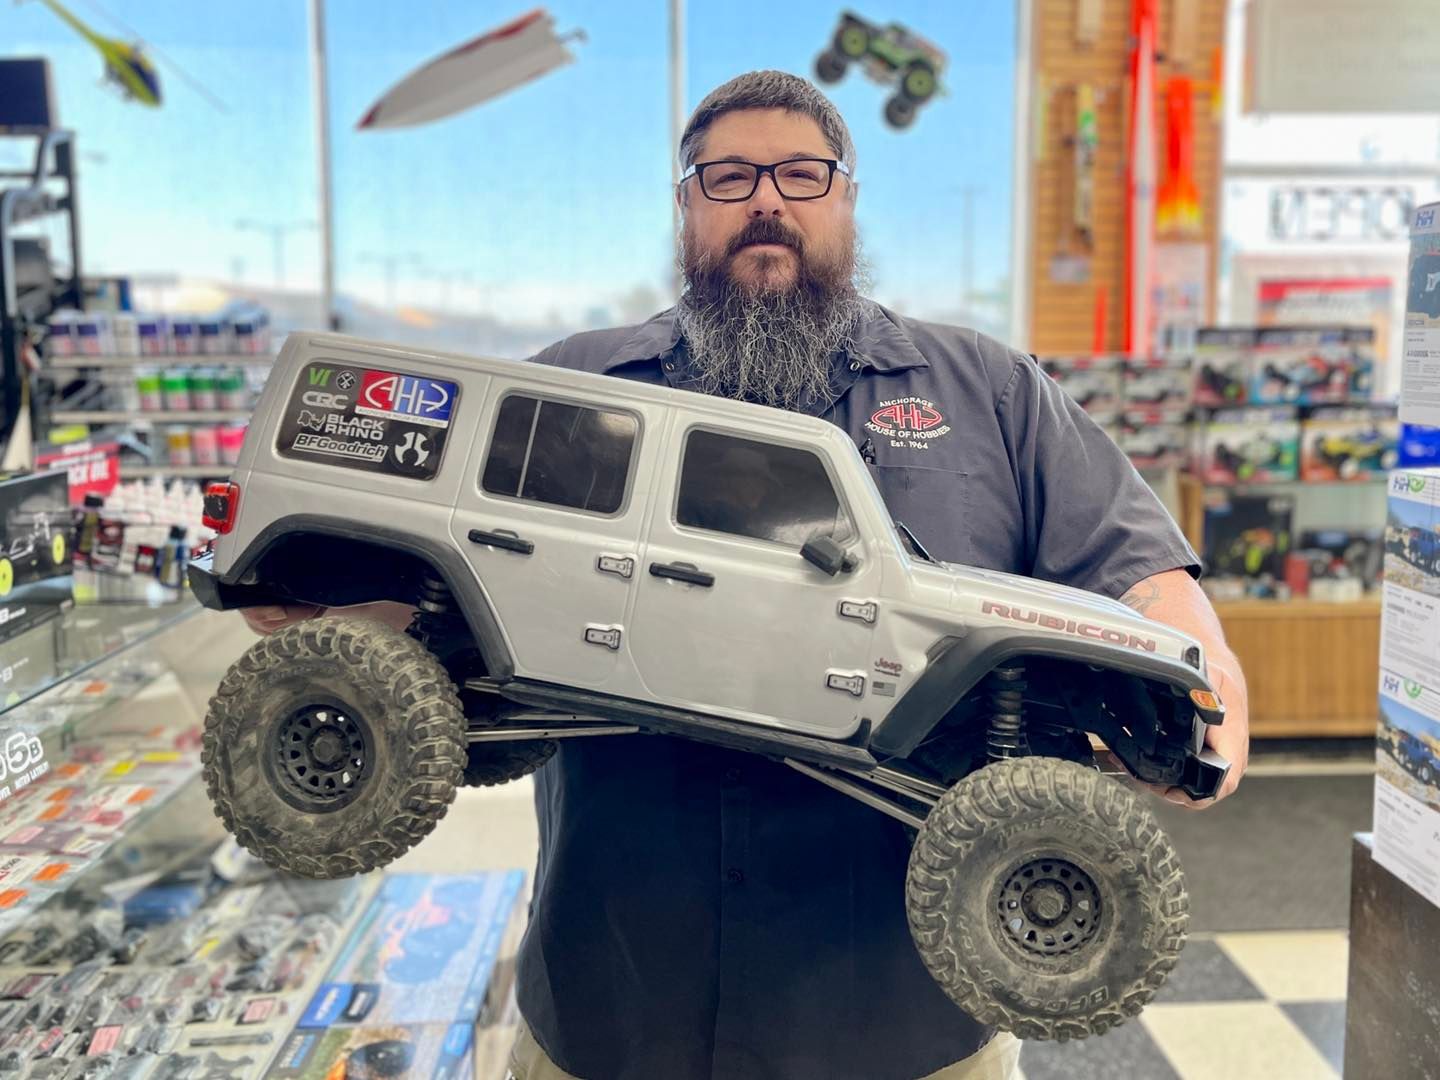 Inside the hobby shop, James shows off a large RC rock crawler, the SCX6.